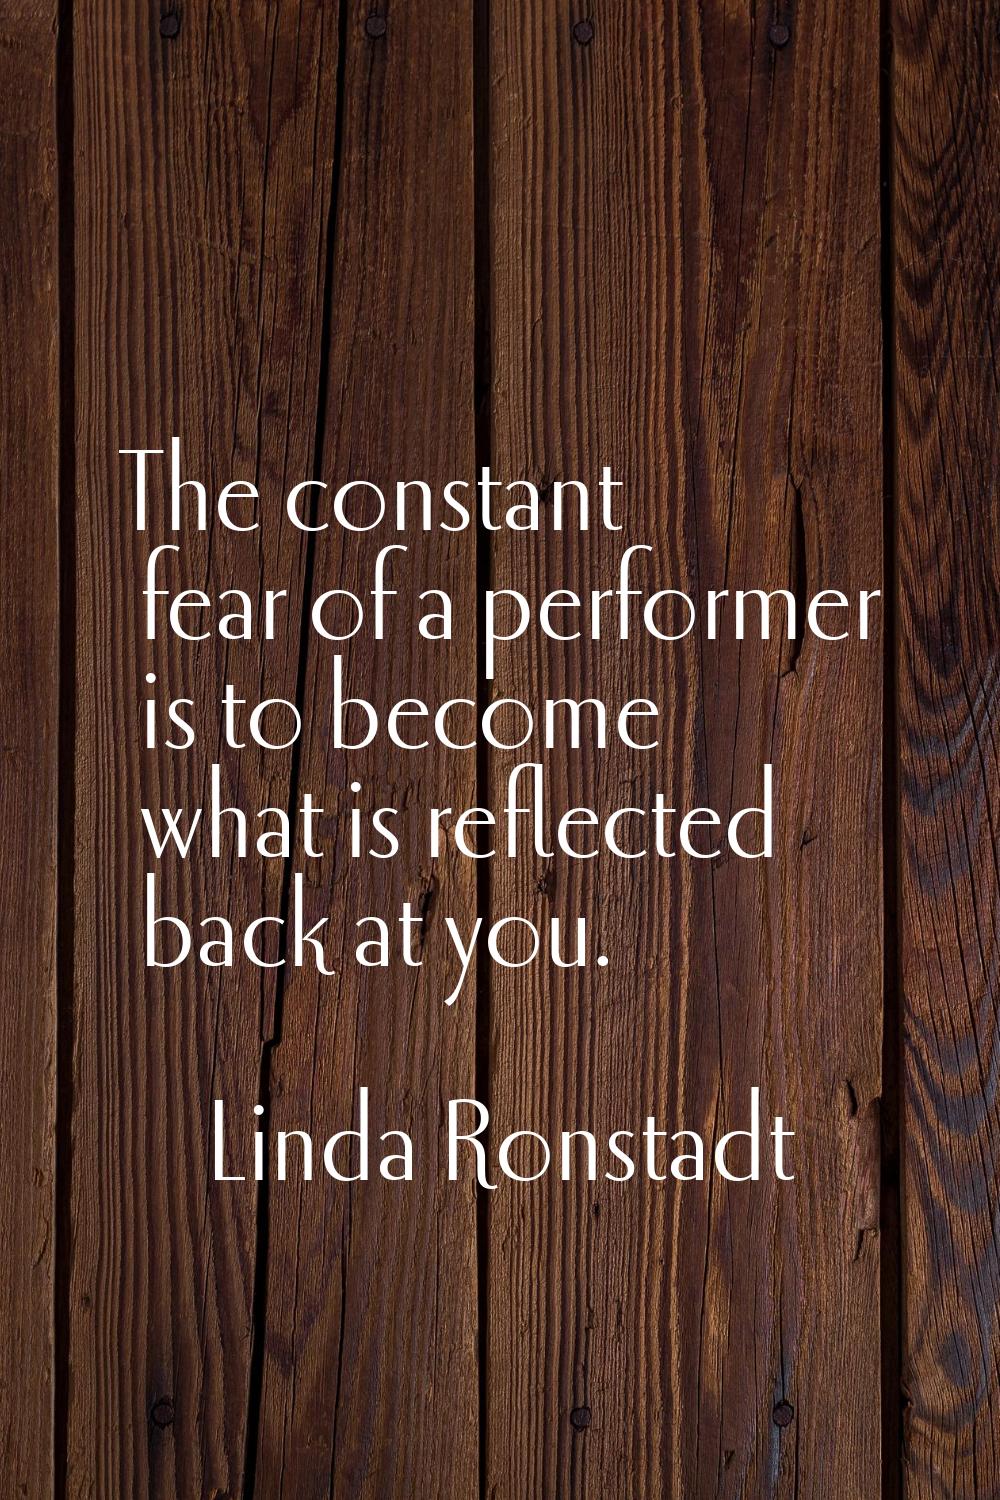 The constant fear of a performer is to become what is reflected back at you.